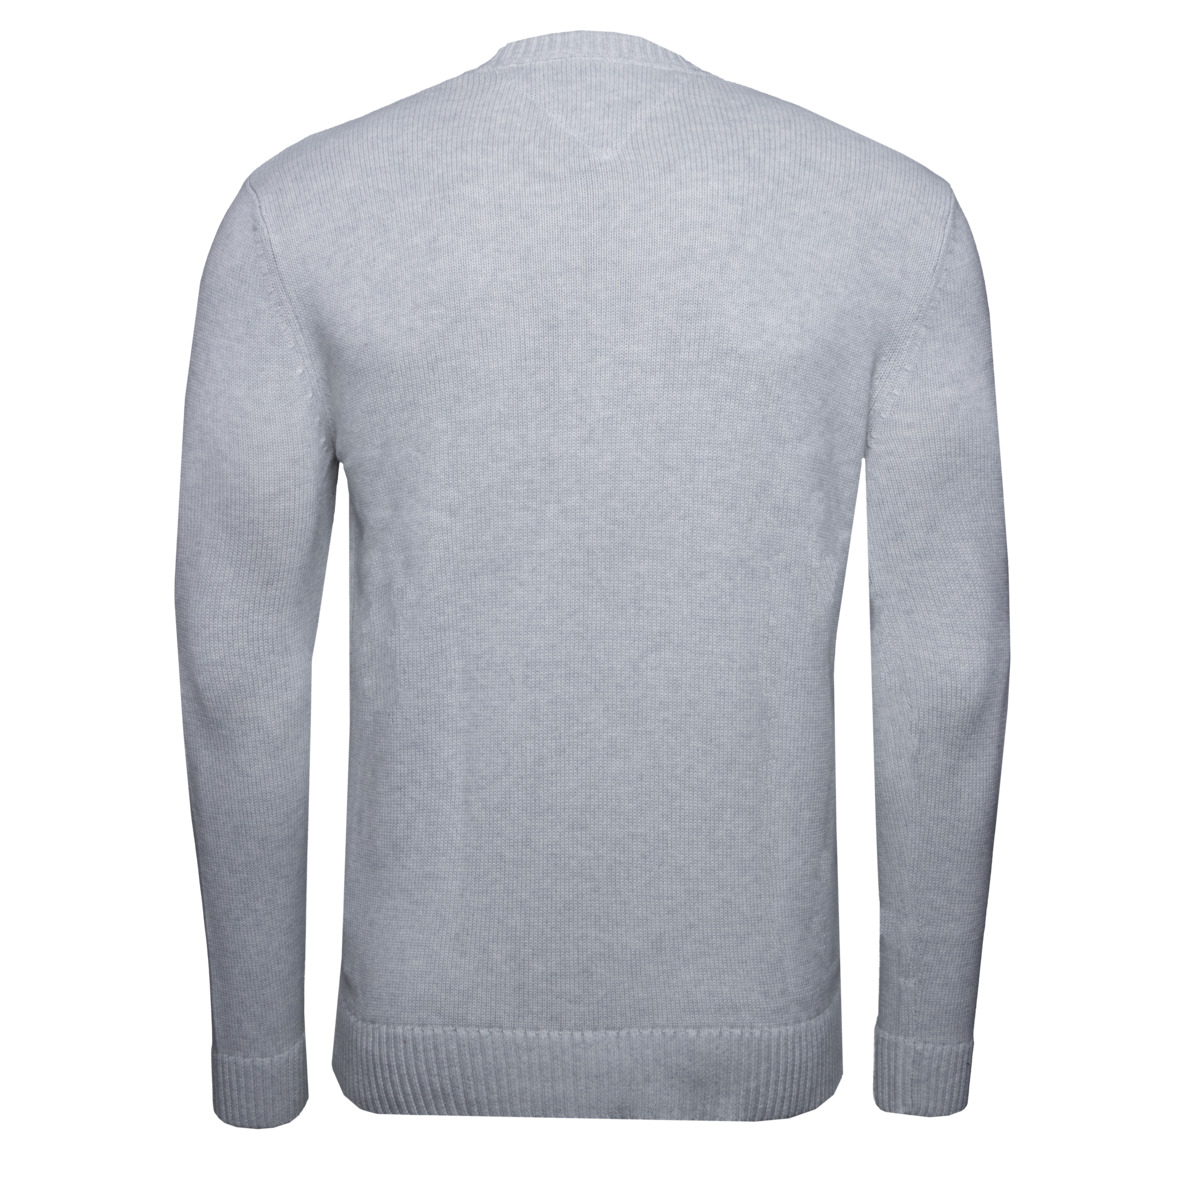 Tommy Hilfiger Tommy Jeans Essential Crew Neck Sweater grau